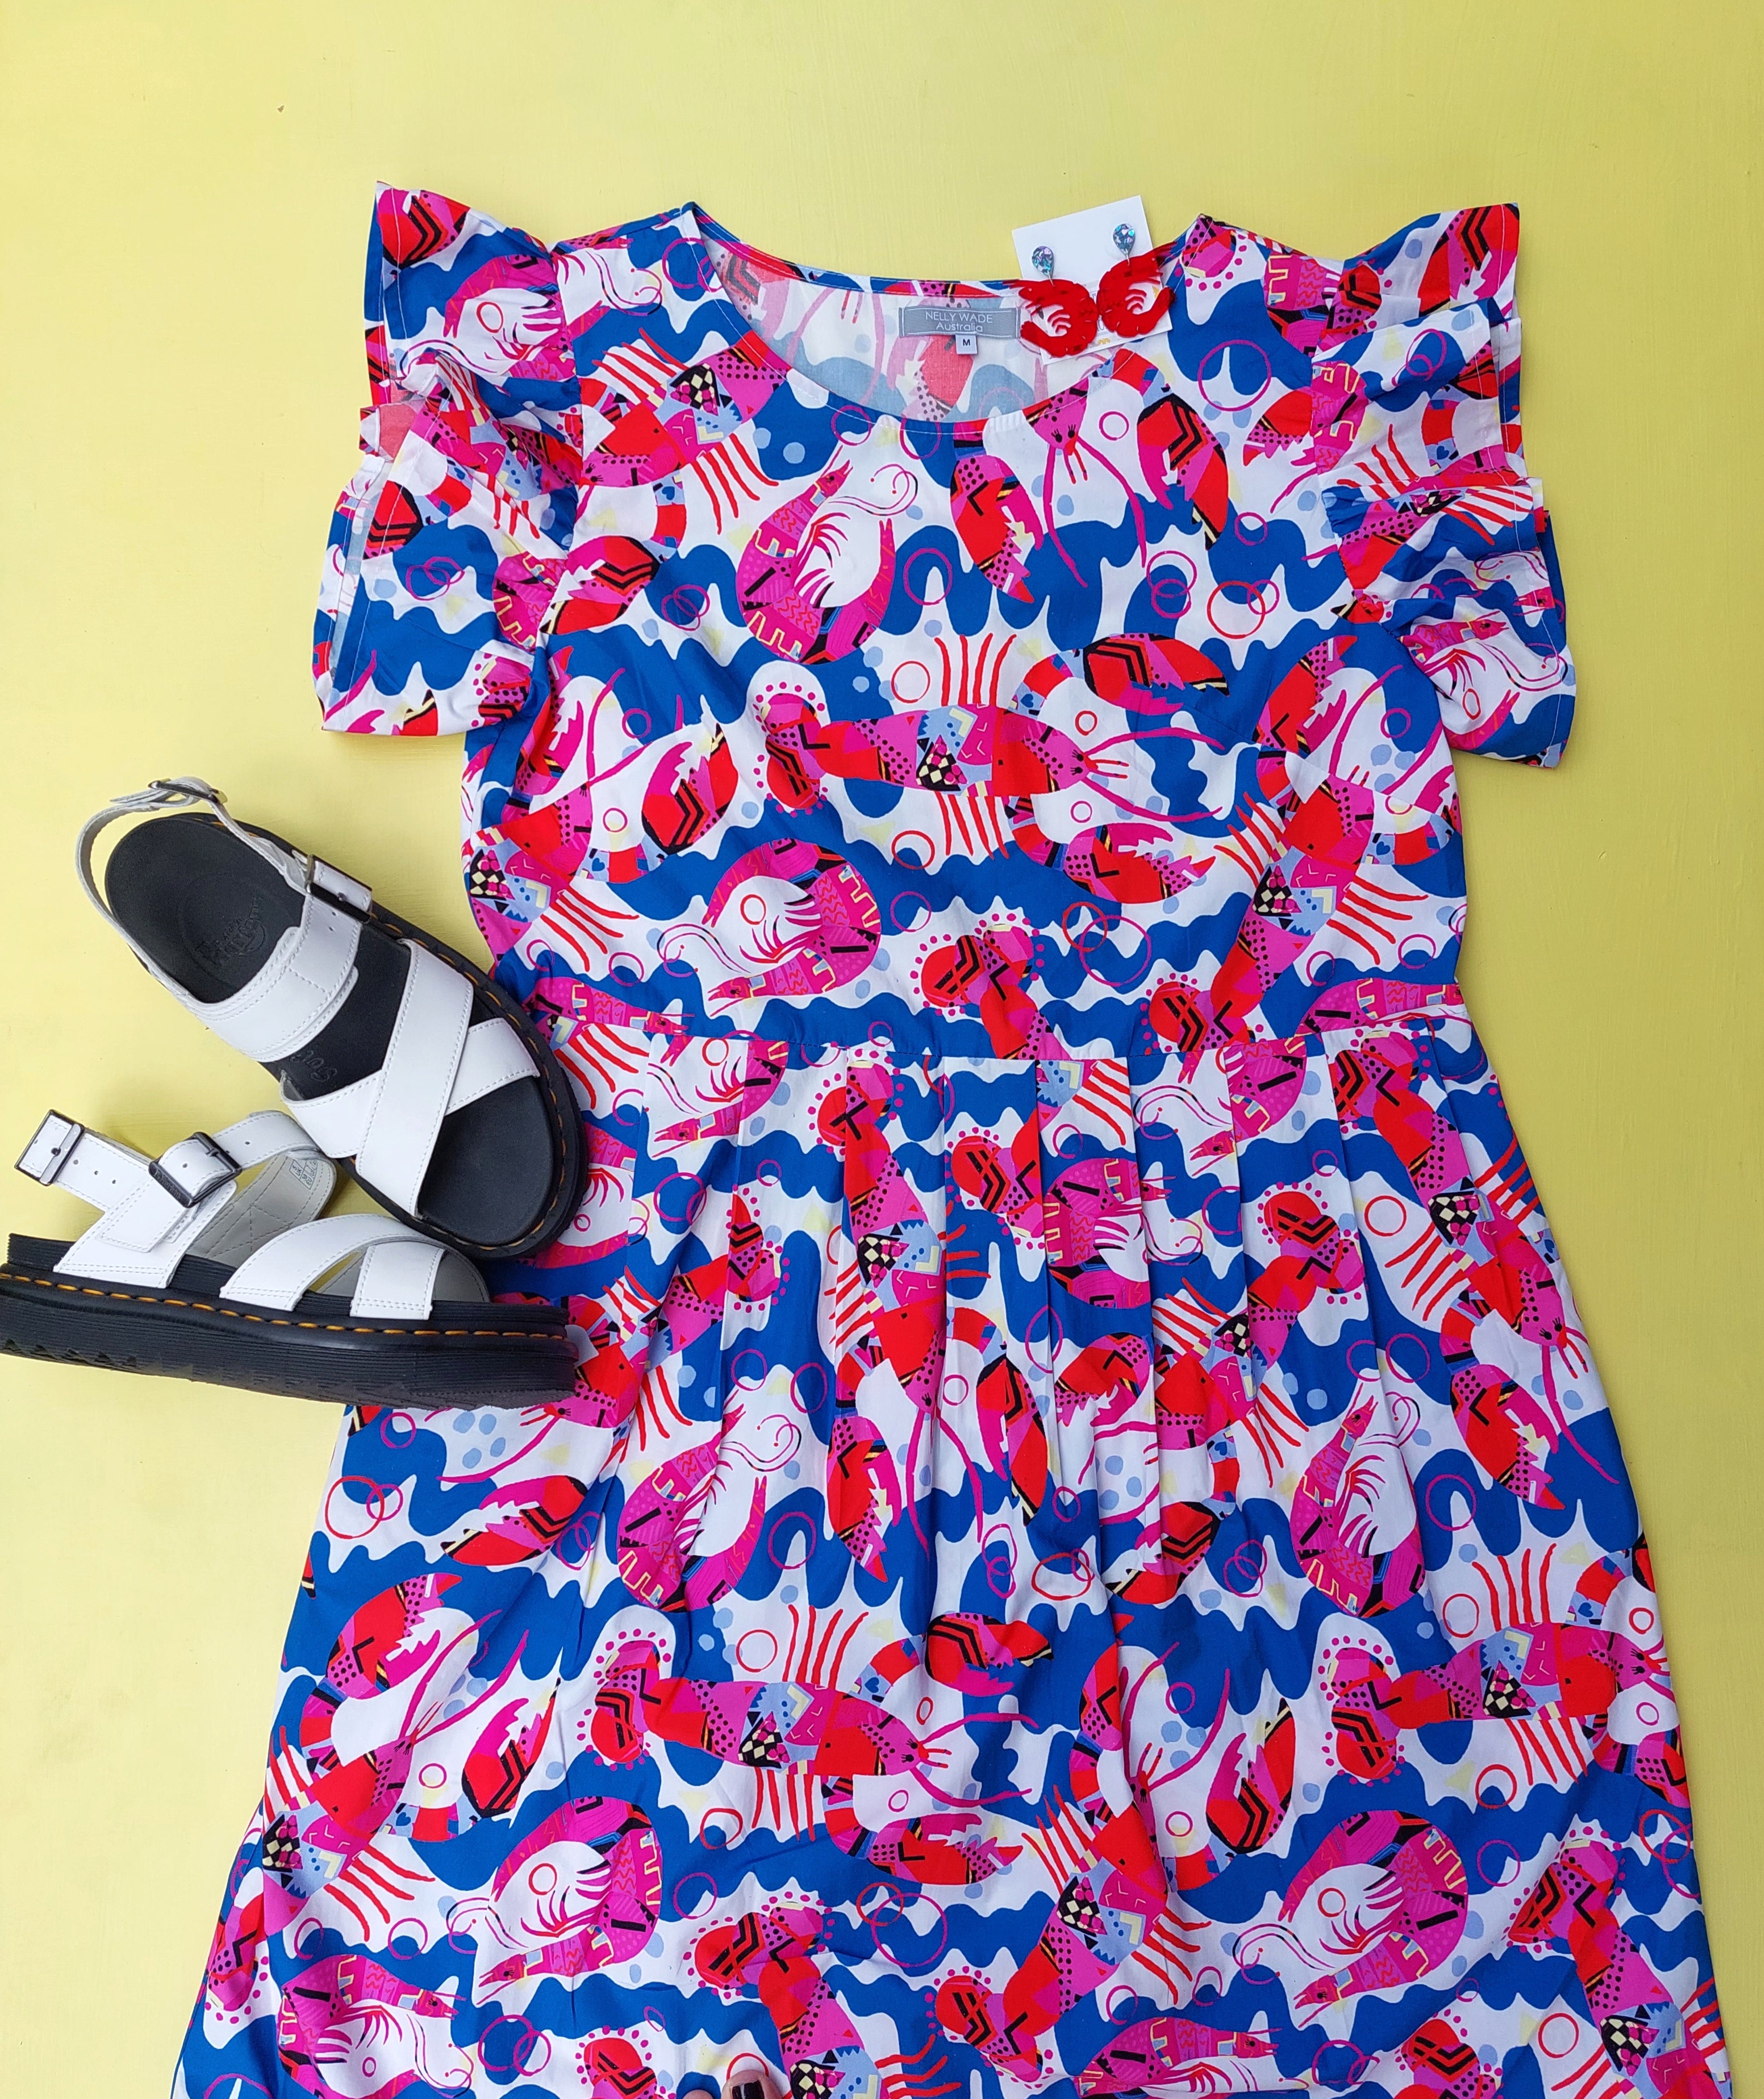 Nelly Wade Dress in Be Shellfish Sale